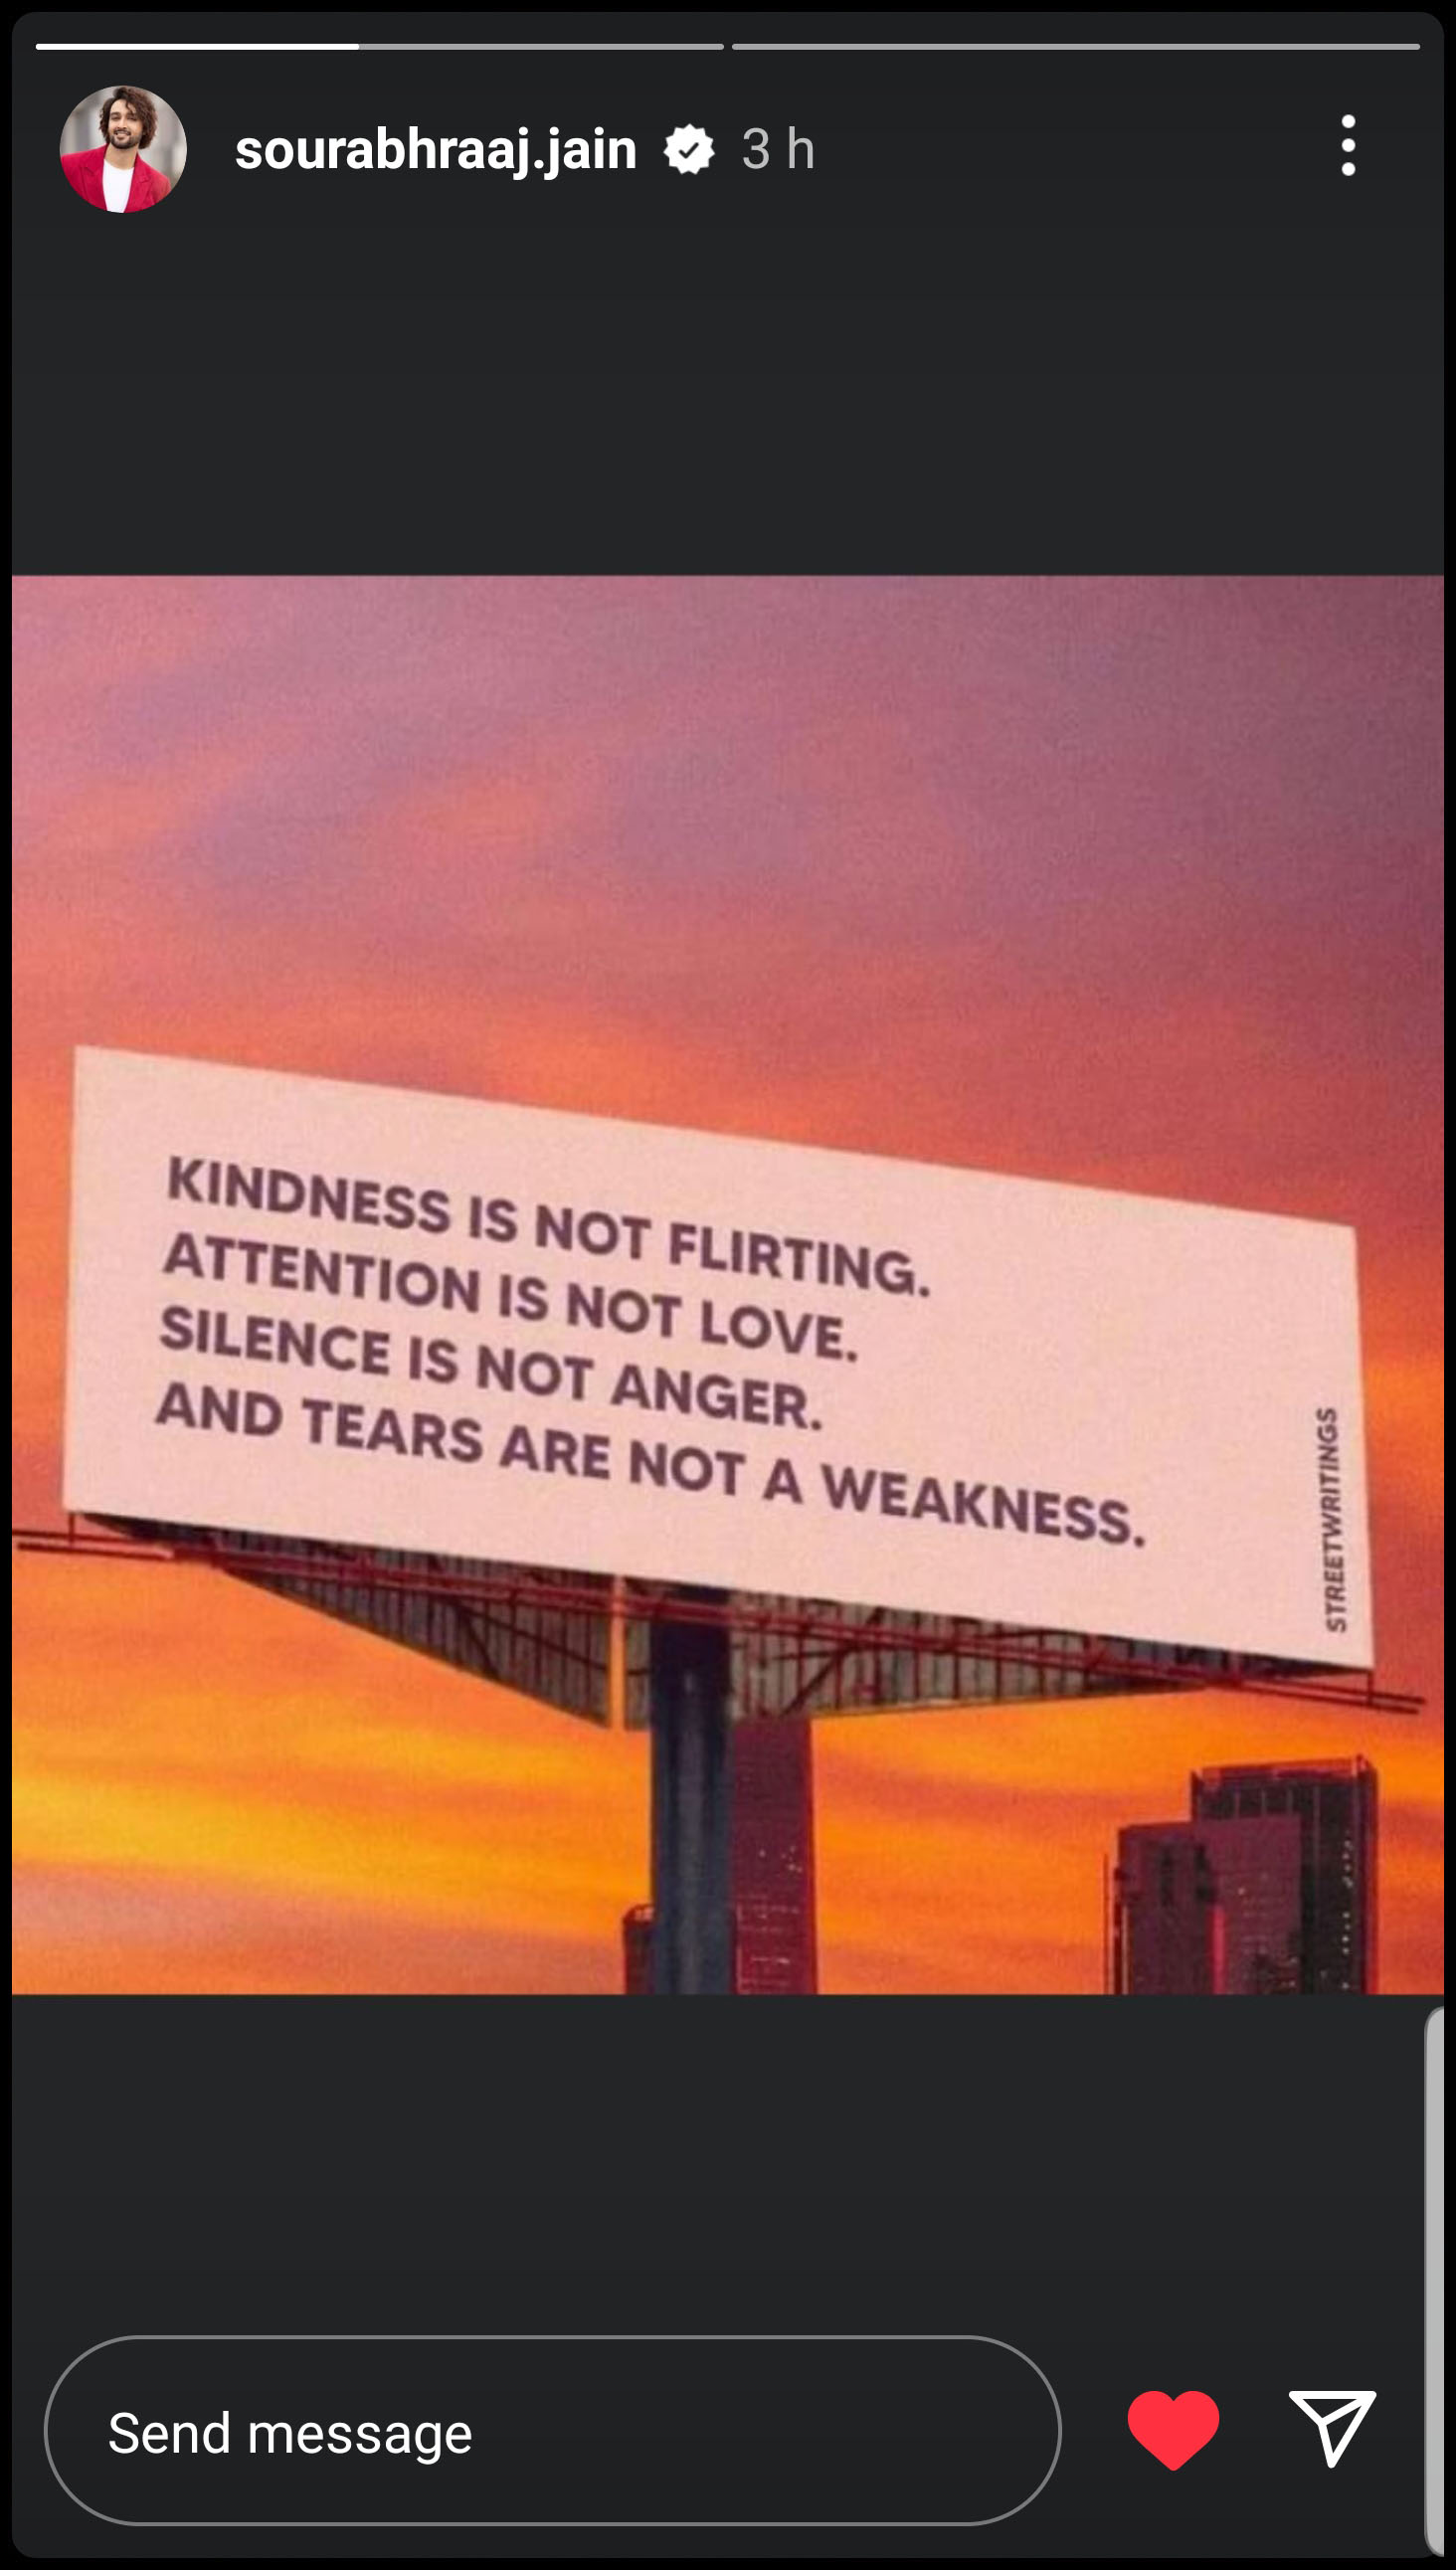 A quote meme, shared as an Instagram story by Sourabh Raaj Jain, that reads: "Kindness is not flirting. Attention is not love. Silence is not anger. And tears are not a weakness."